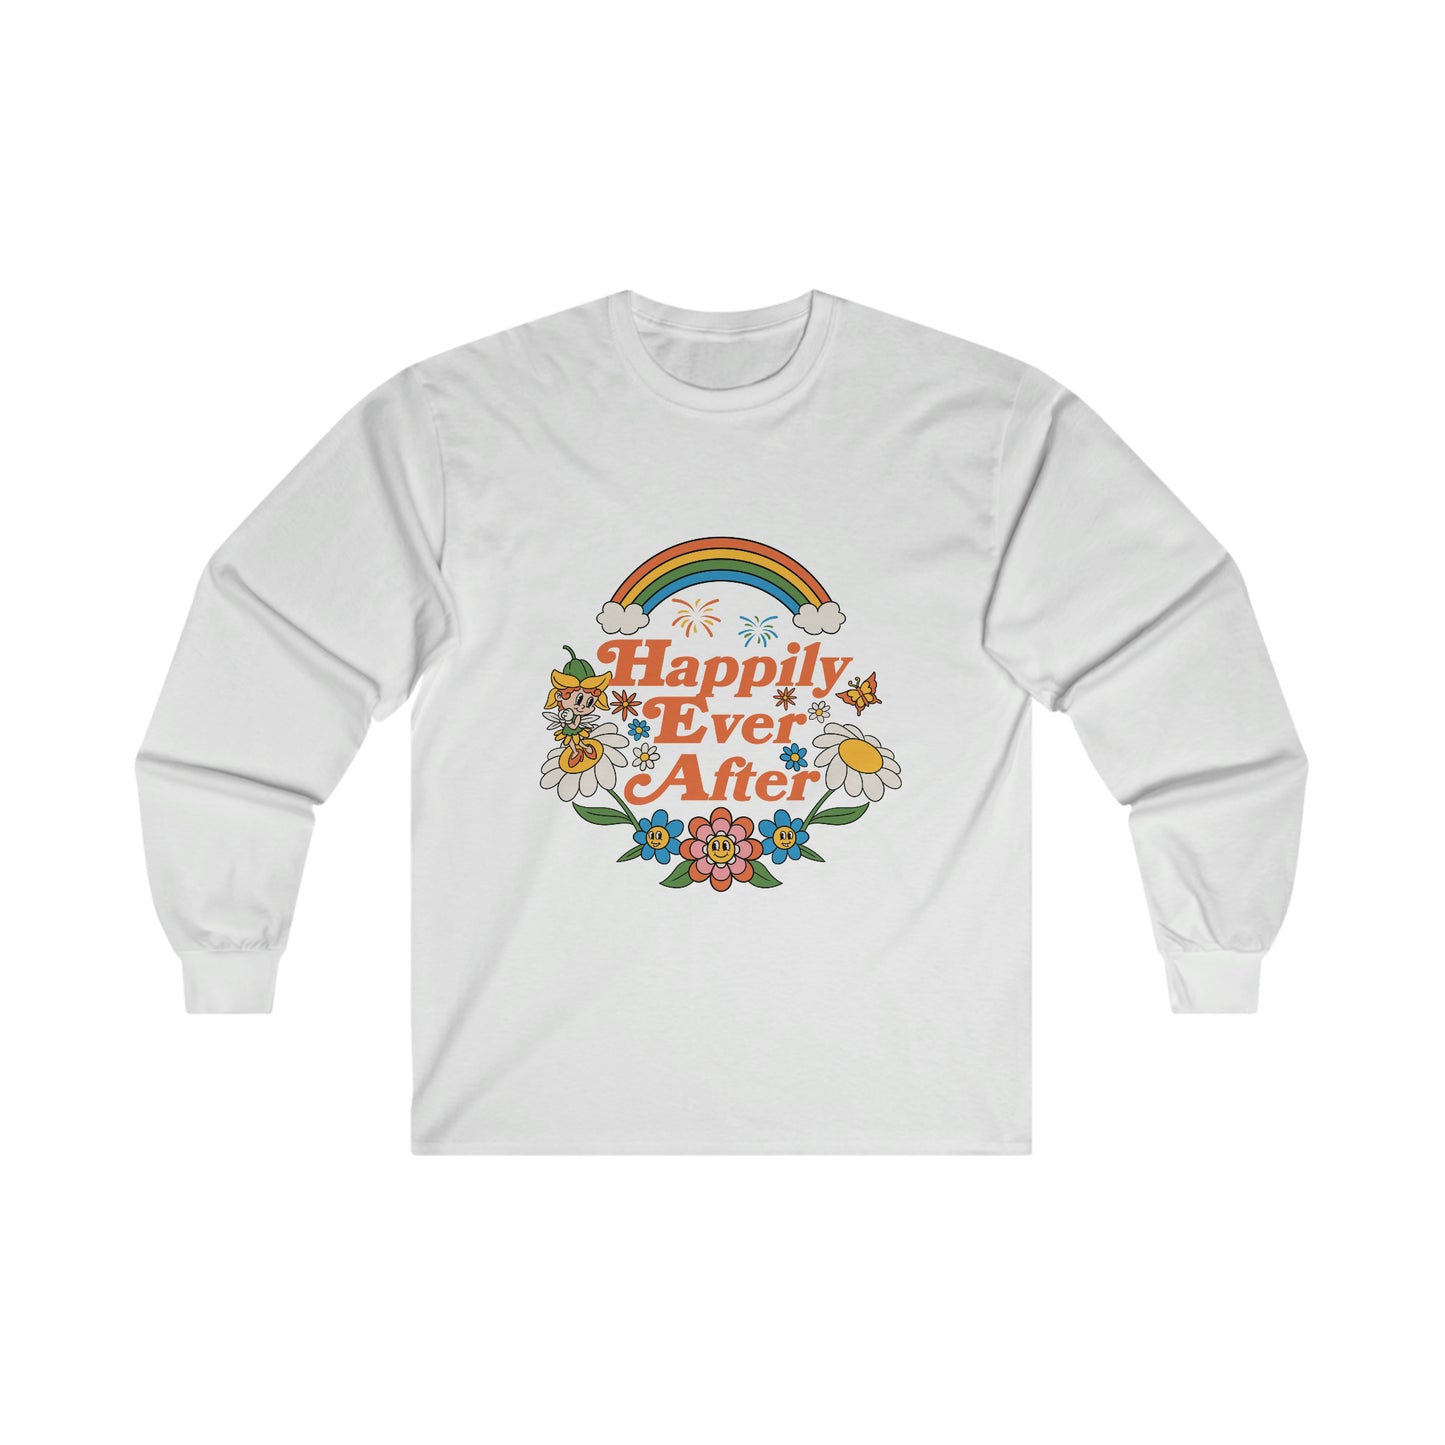 Happily Ever After - Long Sleeve Tee